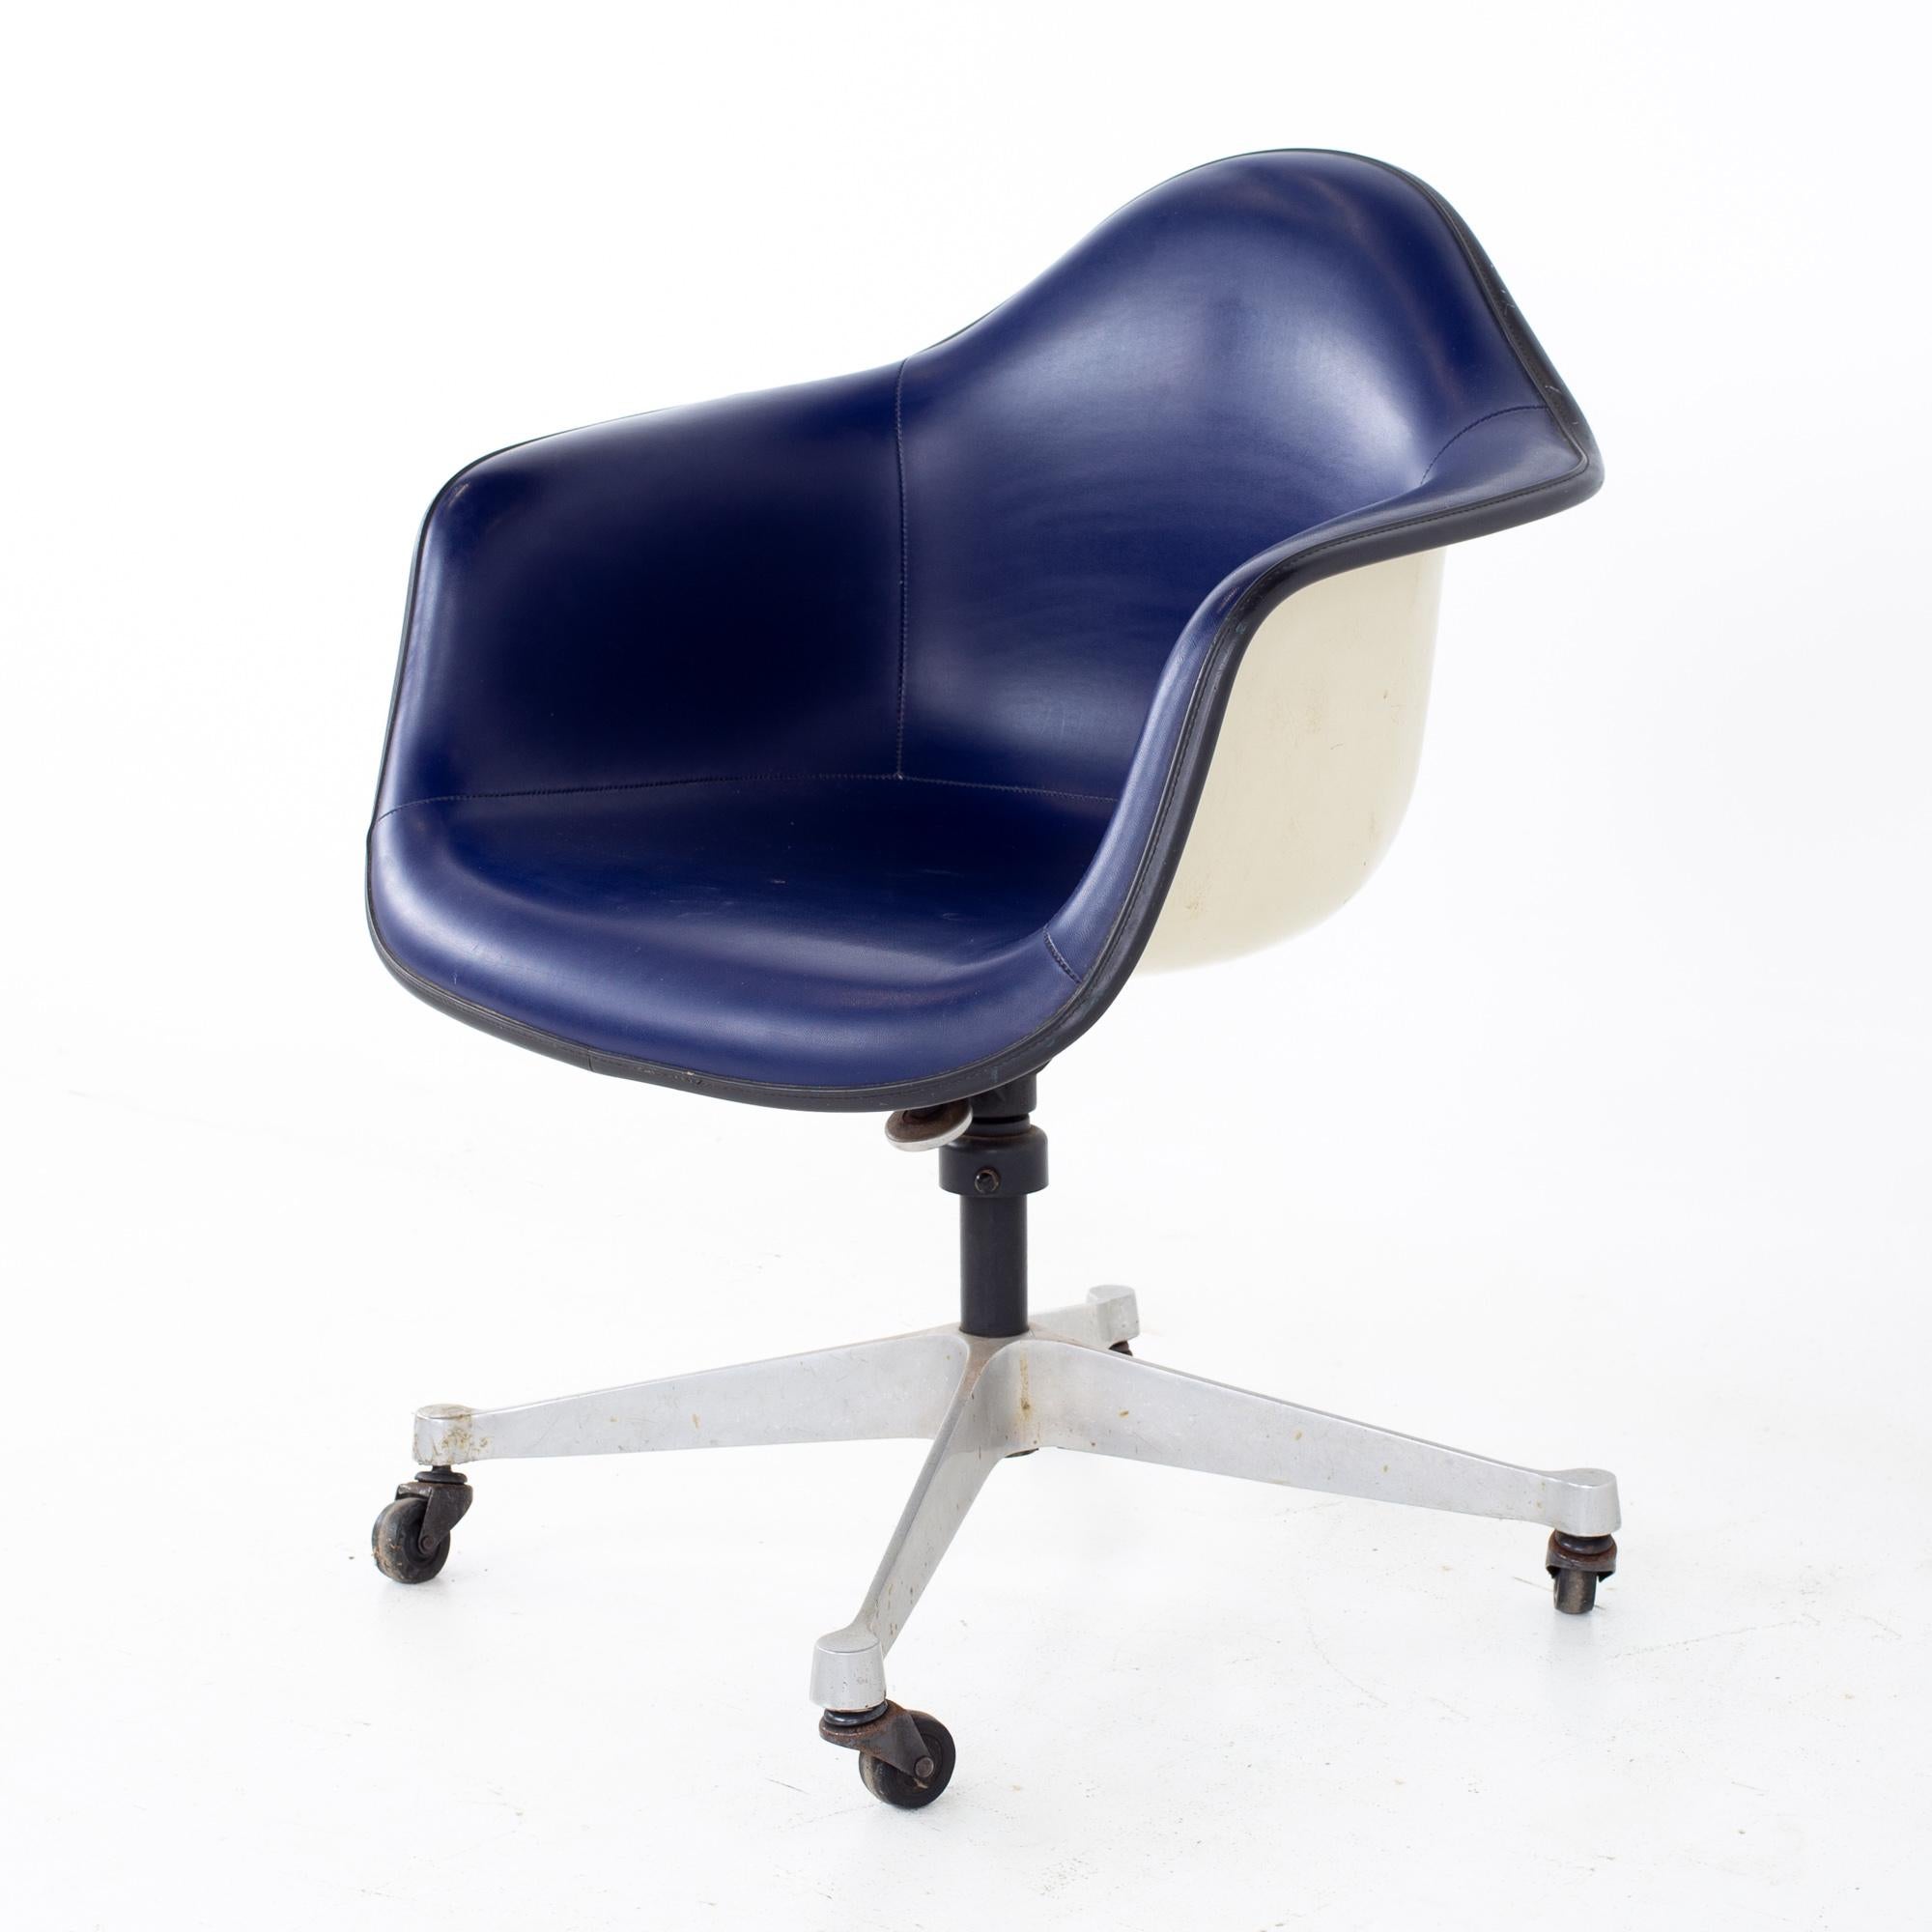 Eames mid century purple fiberglass shell chair
Chair measures: 24.75 wide x 25 deep x 29 high, with a seat height of 18 inches and arm height of 25 inches

All pieces of furniture can be had in what we call restored vintage condition. That means